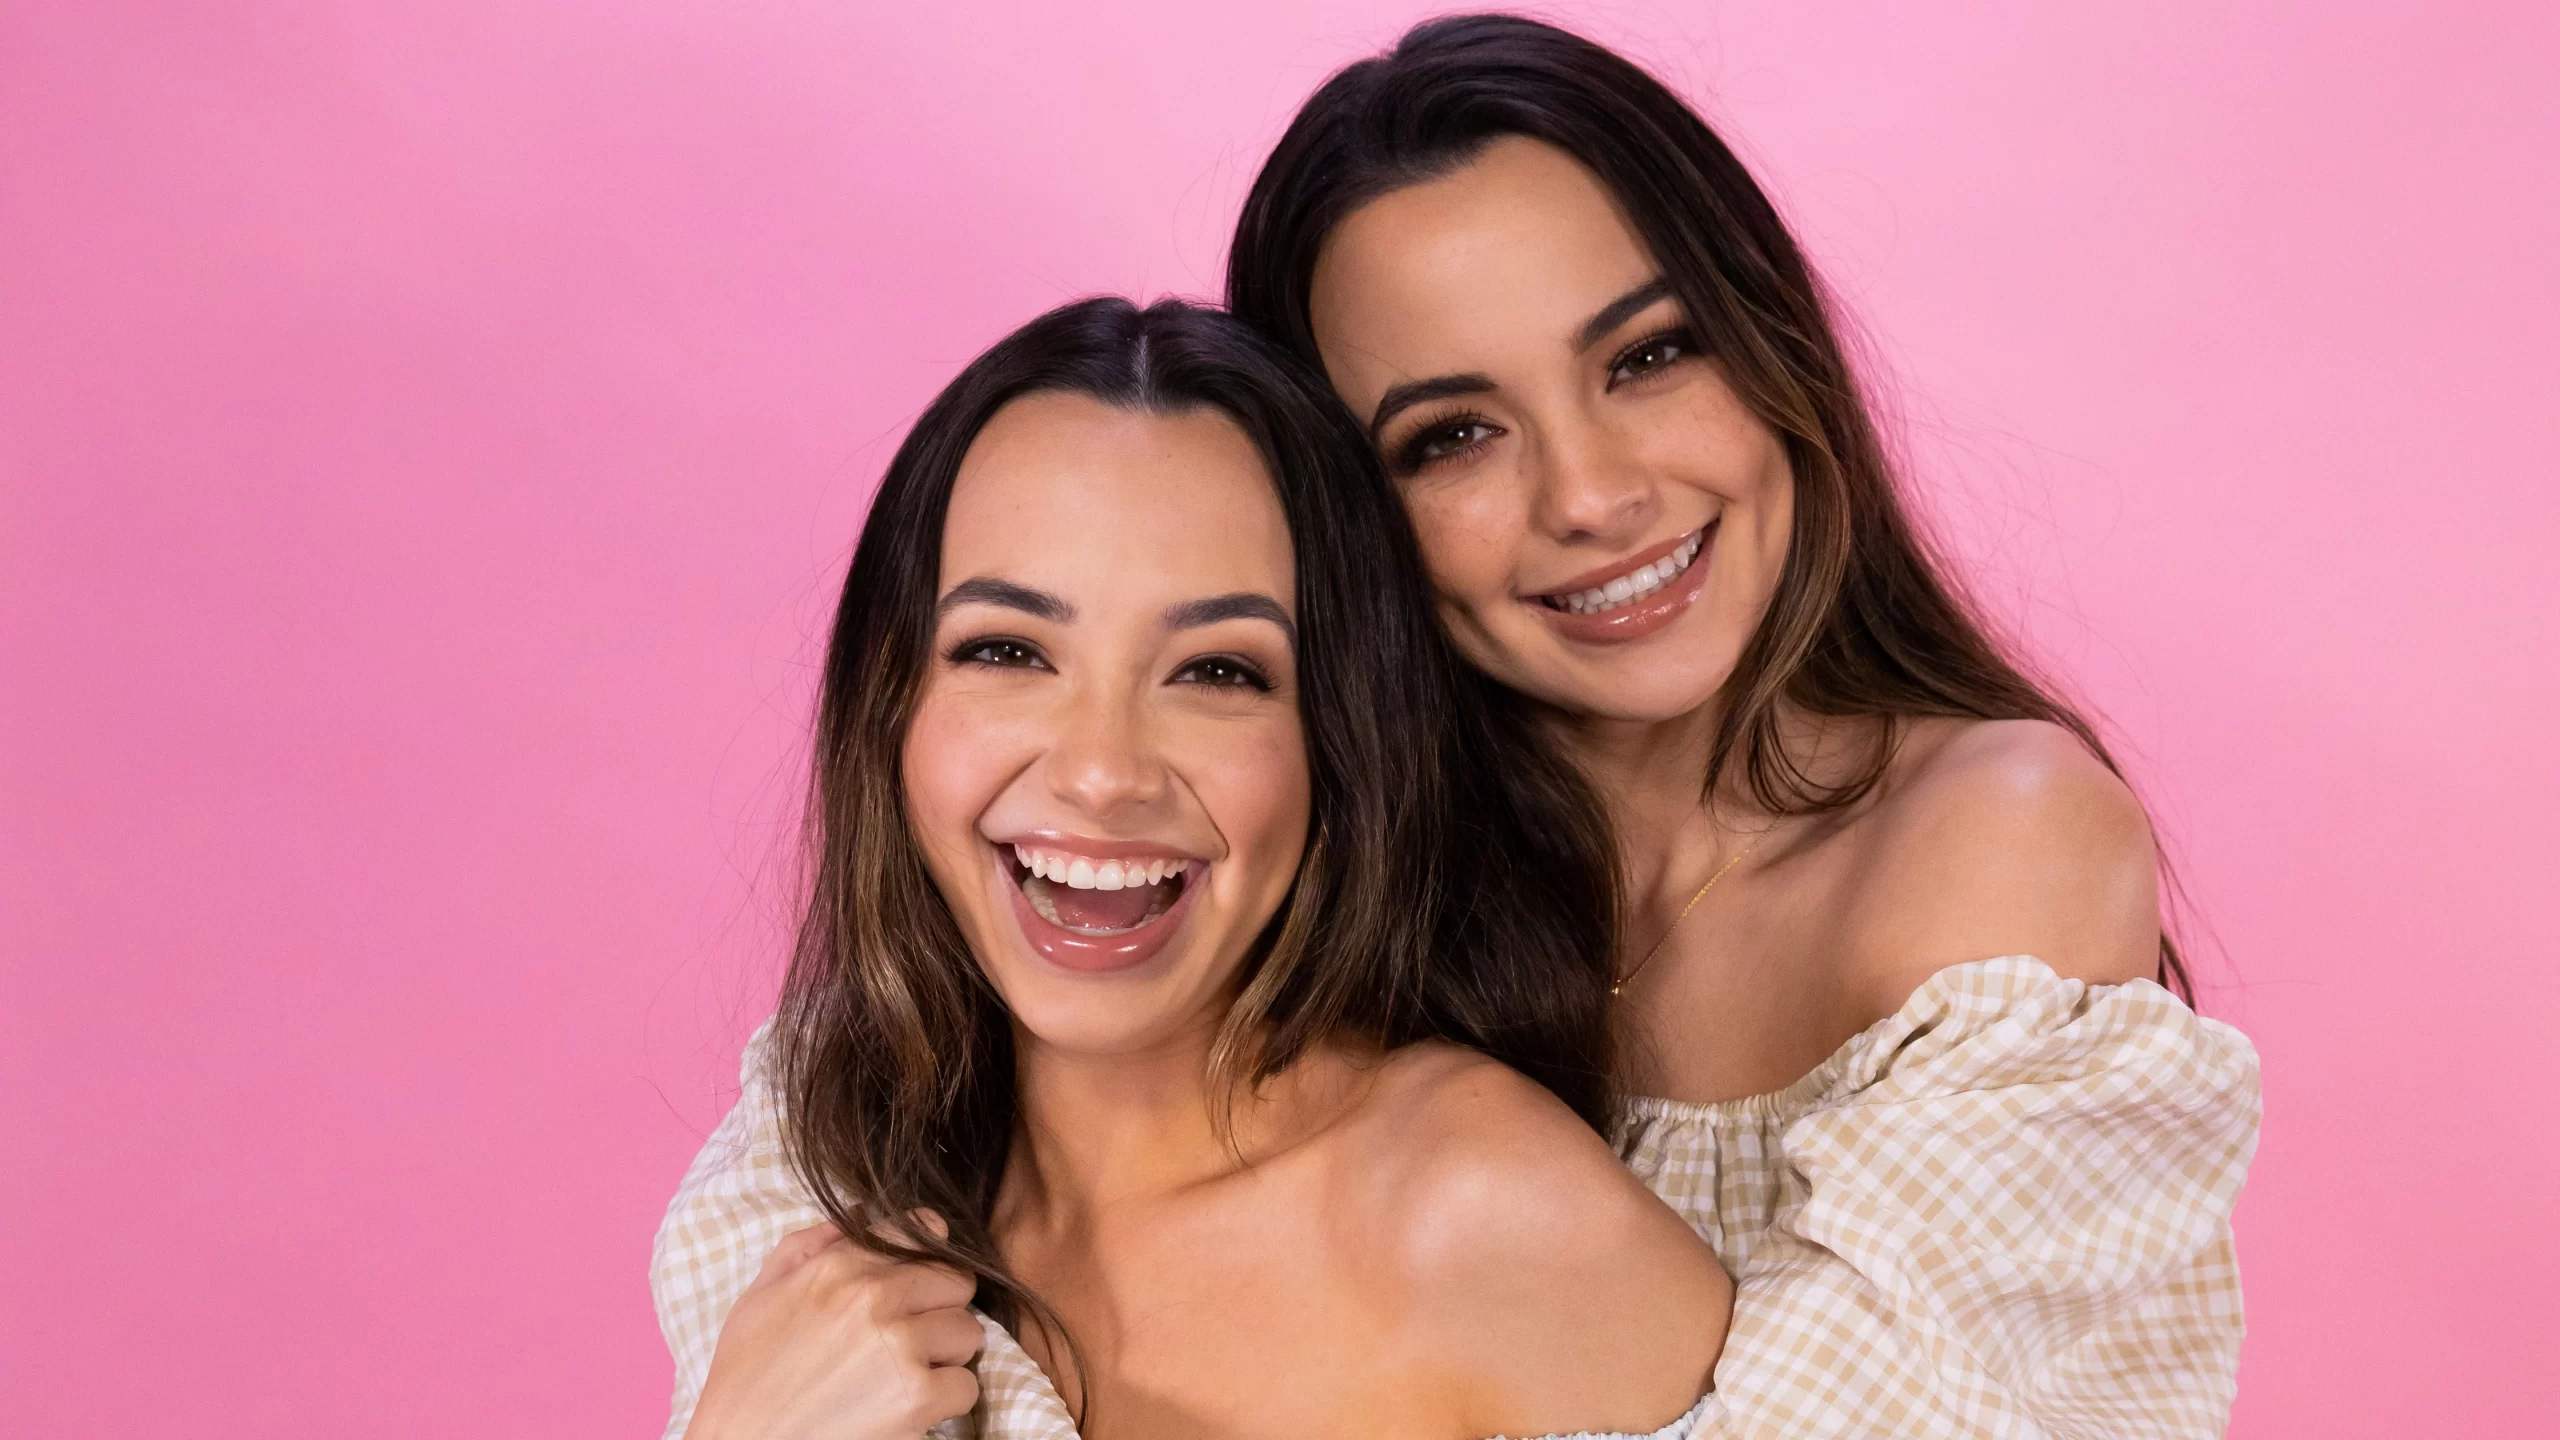 Are the merrell twins married